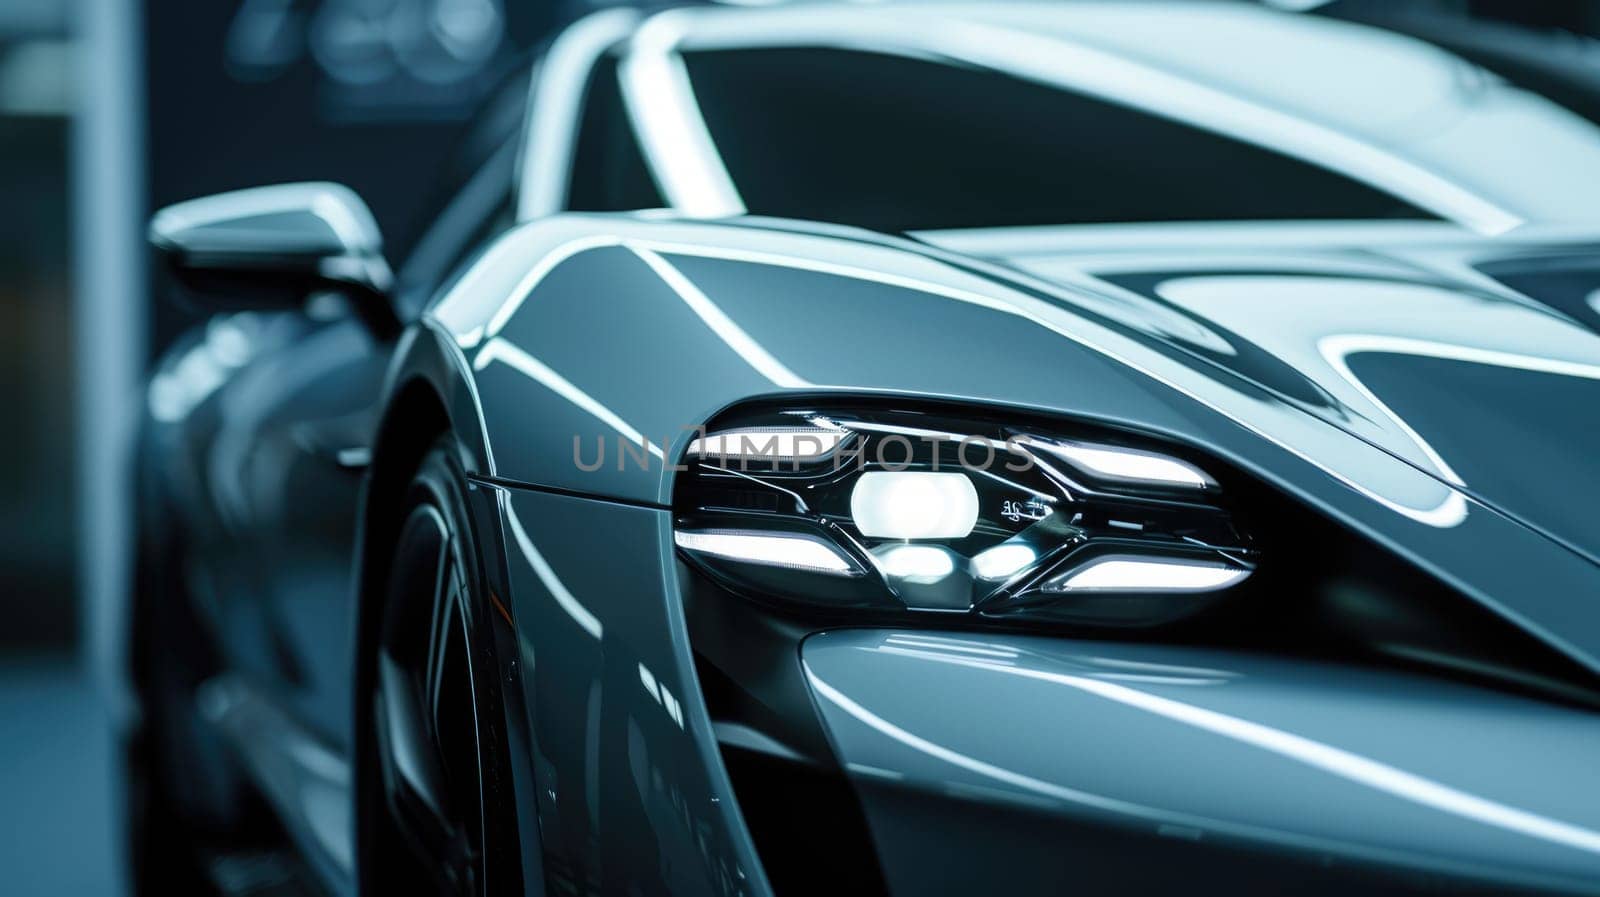 A close-up of a sleek black luxury sports car's headlight, showcased in the reflective ambiance of a premium car showroom. AIG41